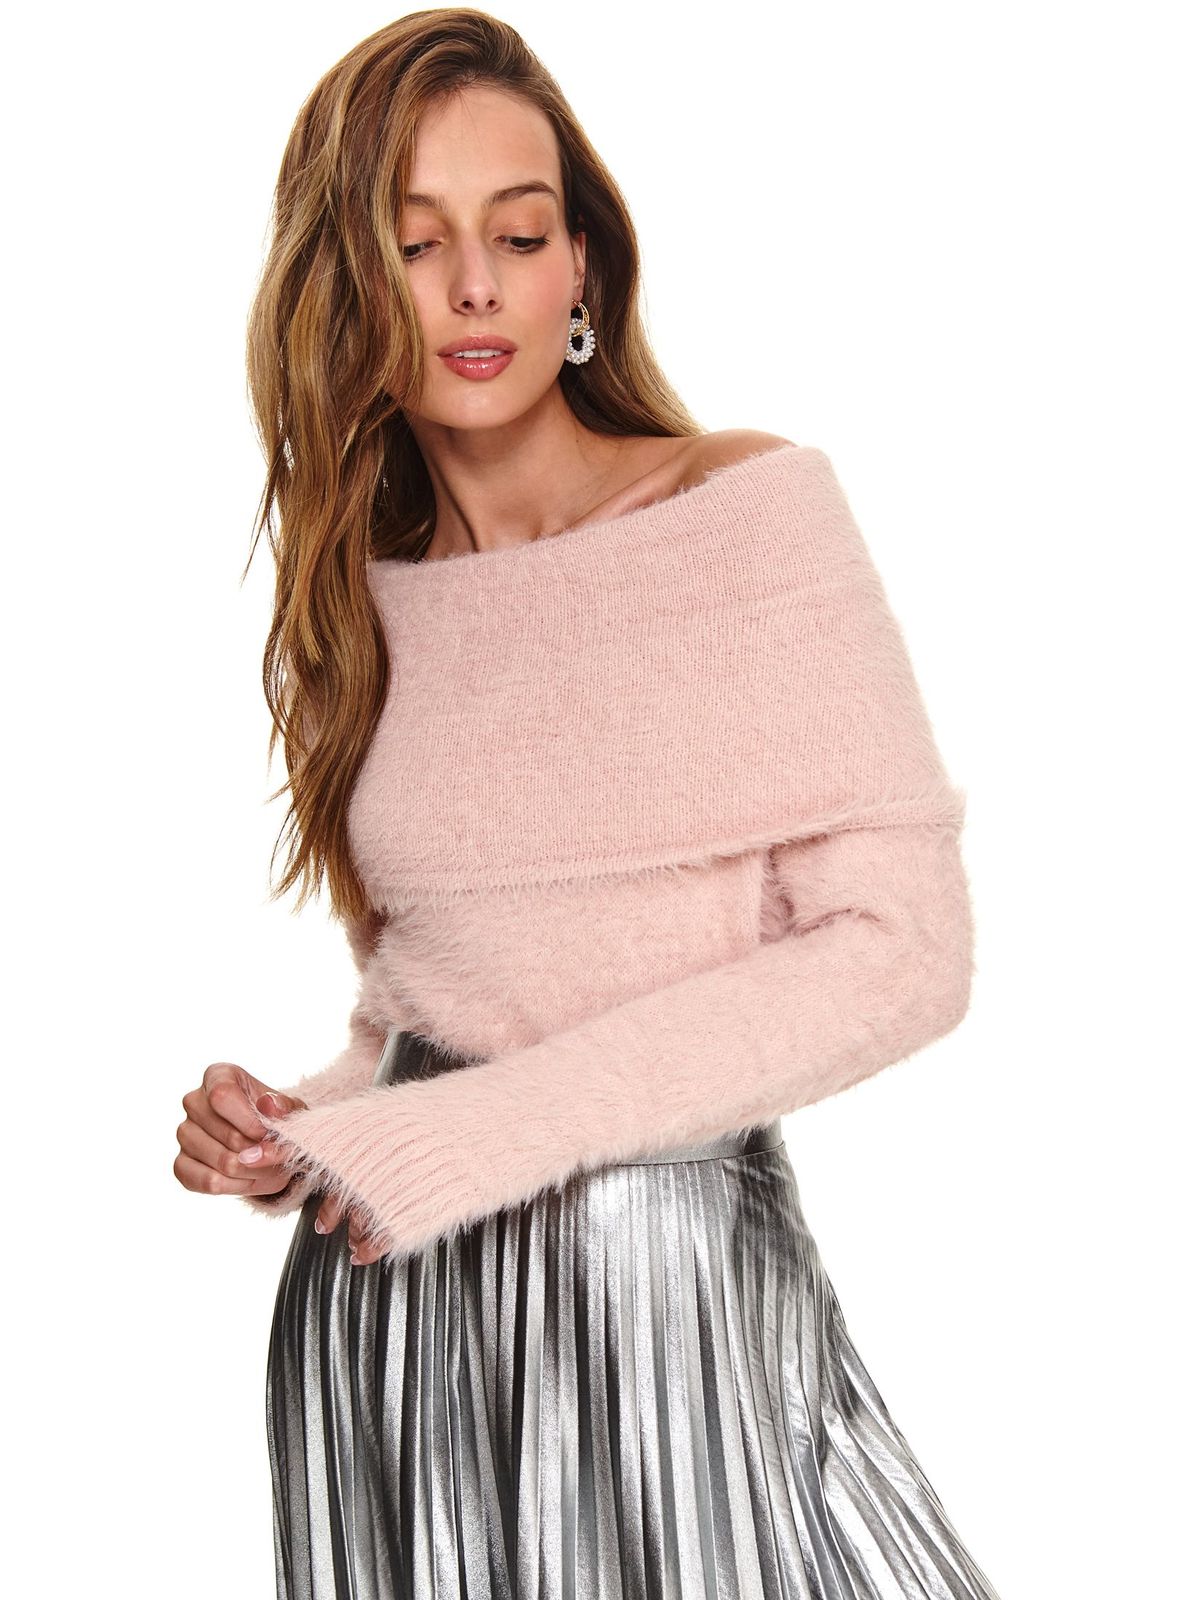 Lightpink sweater casual from fluffy fabric naked shoulders long sleeved